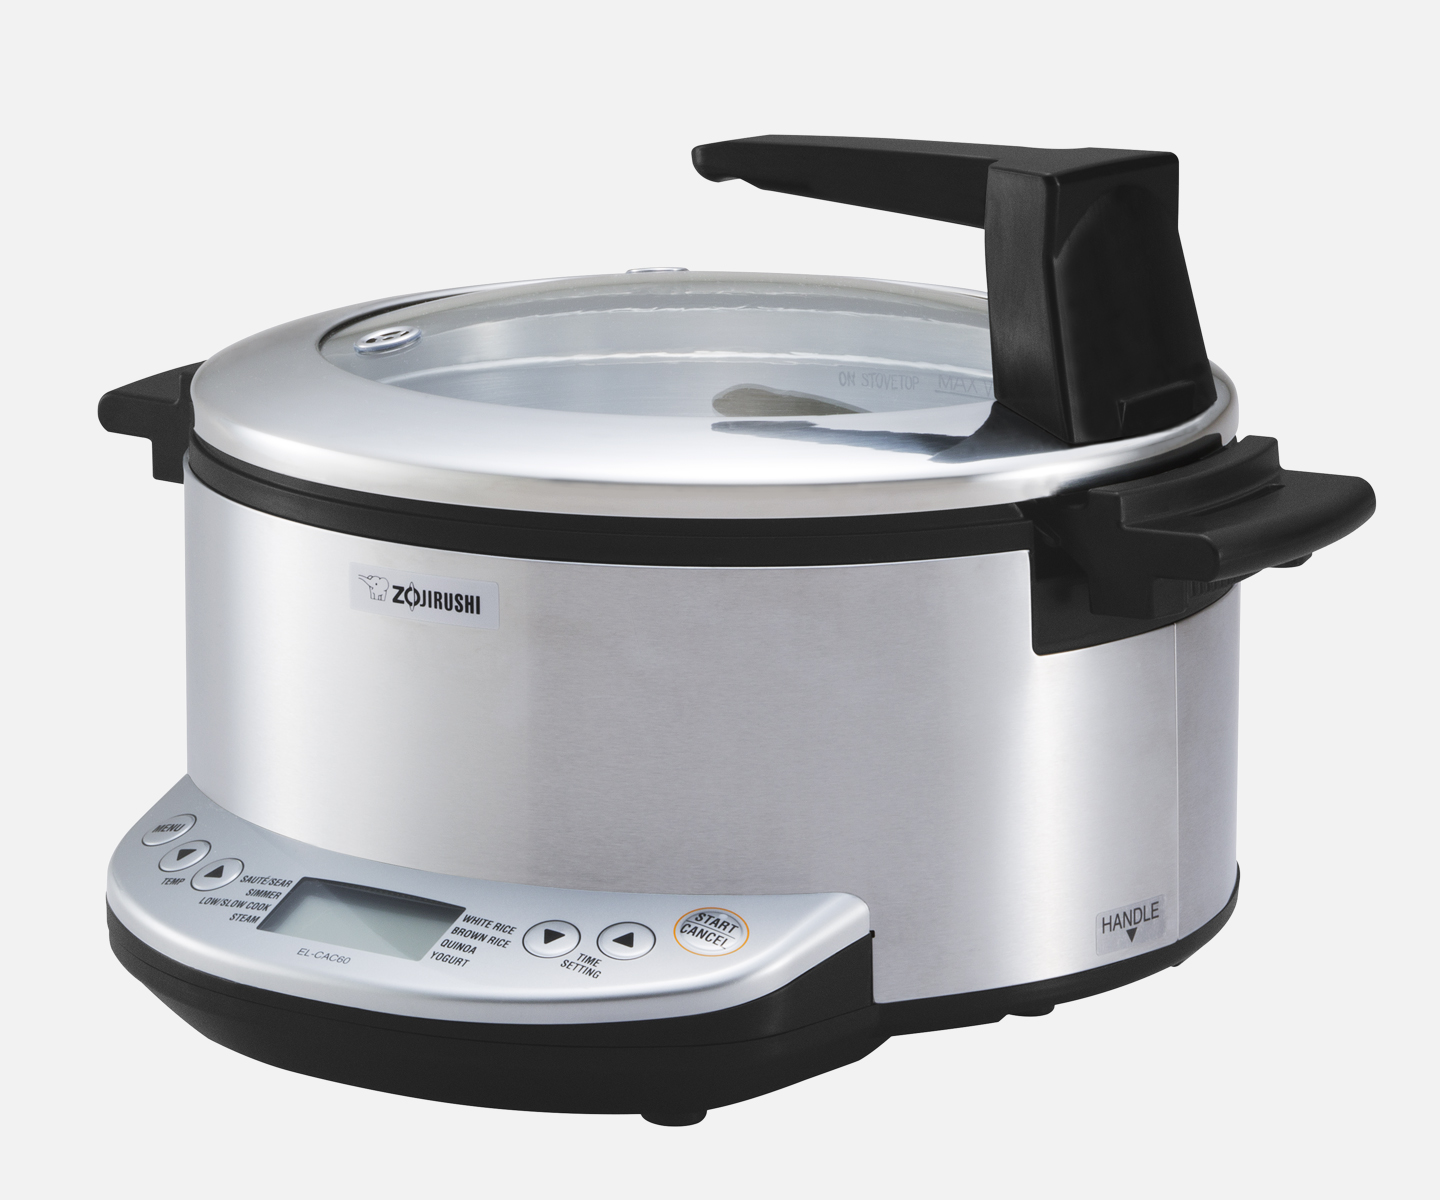 Front view of the multicooker